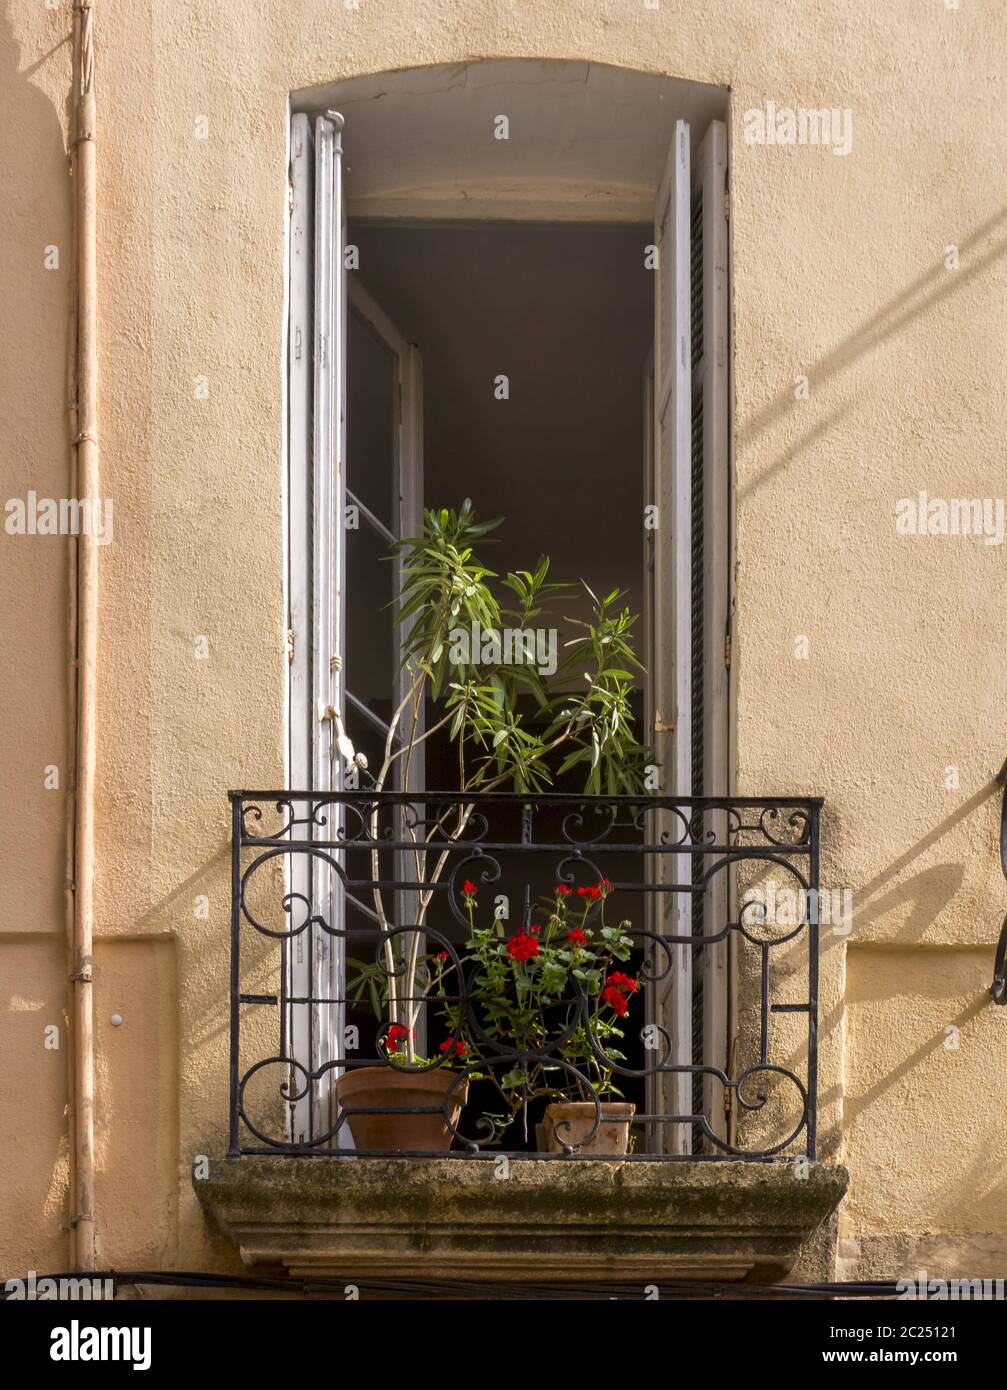 Floor-to-ceiling window with French balcony Stock Photo